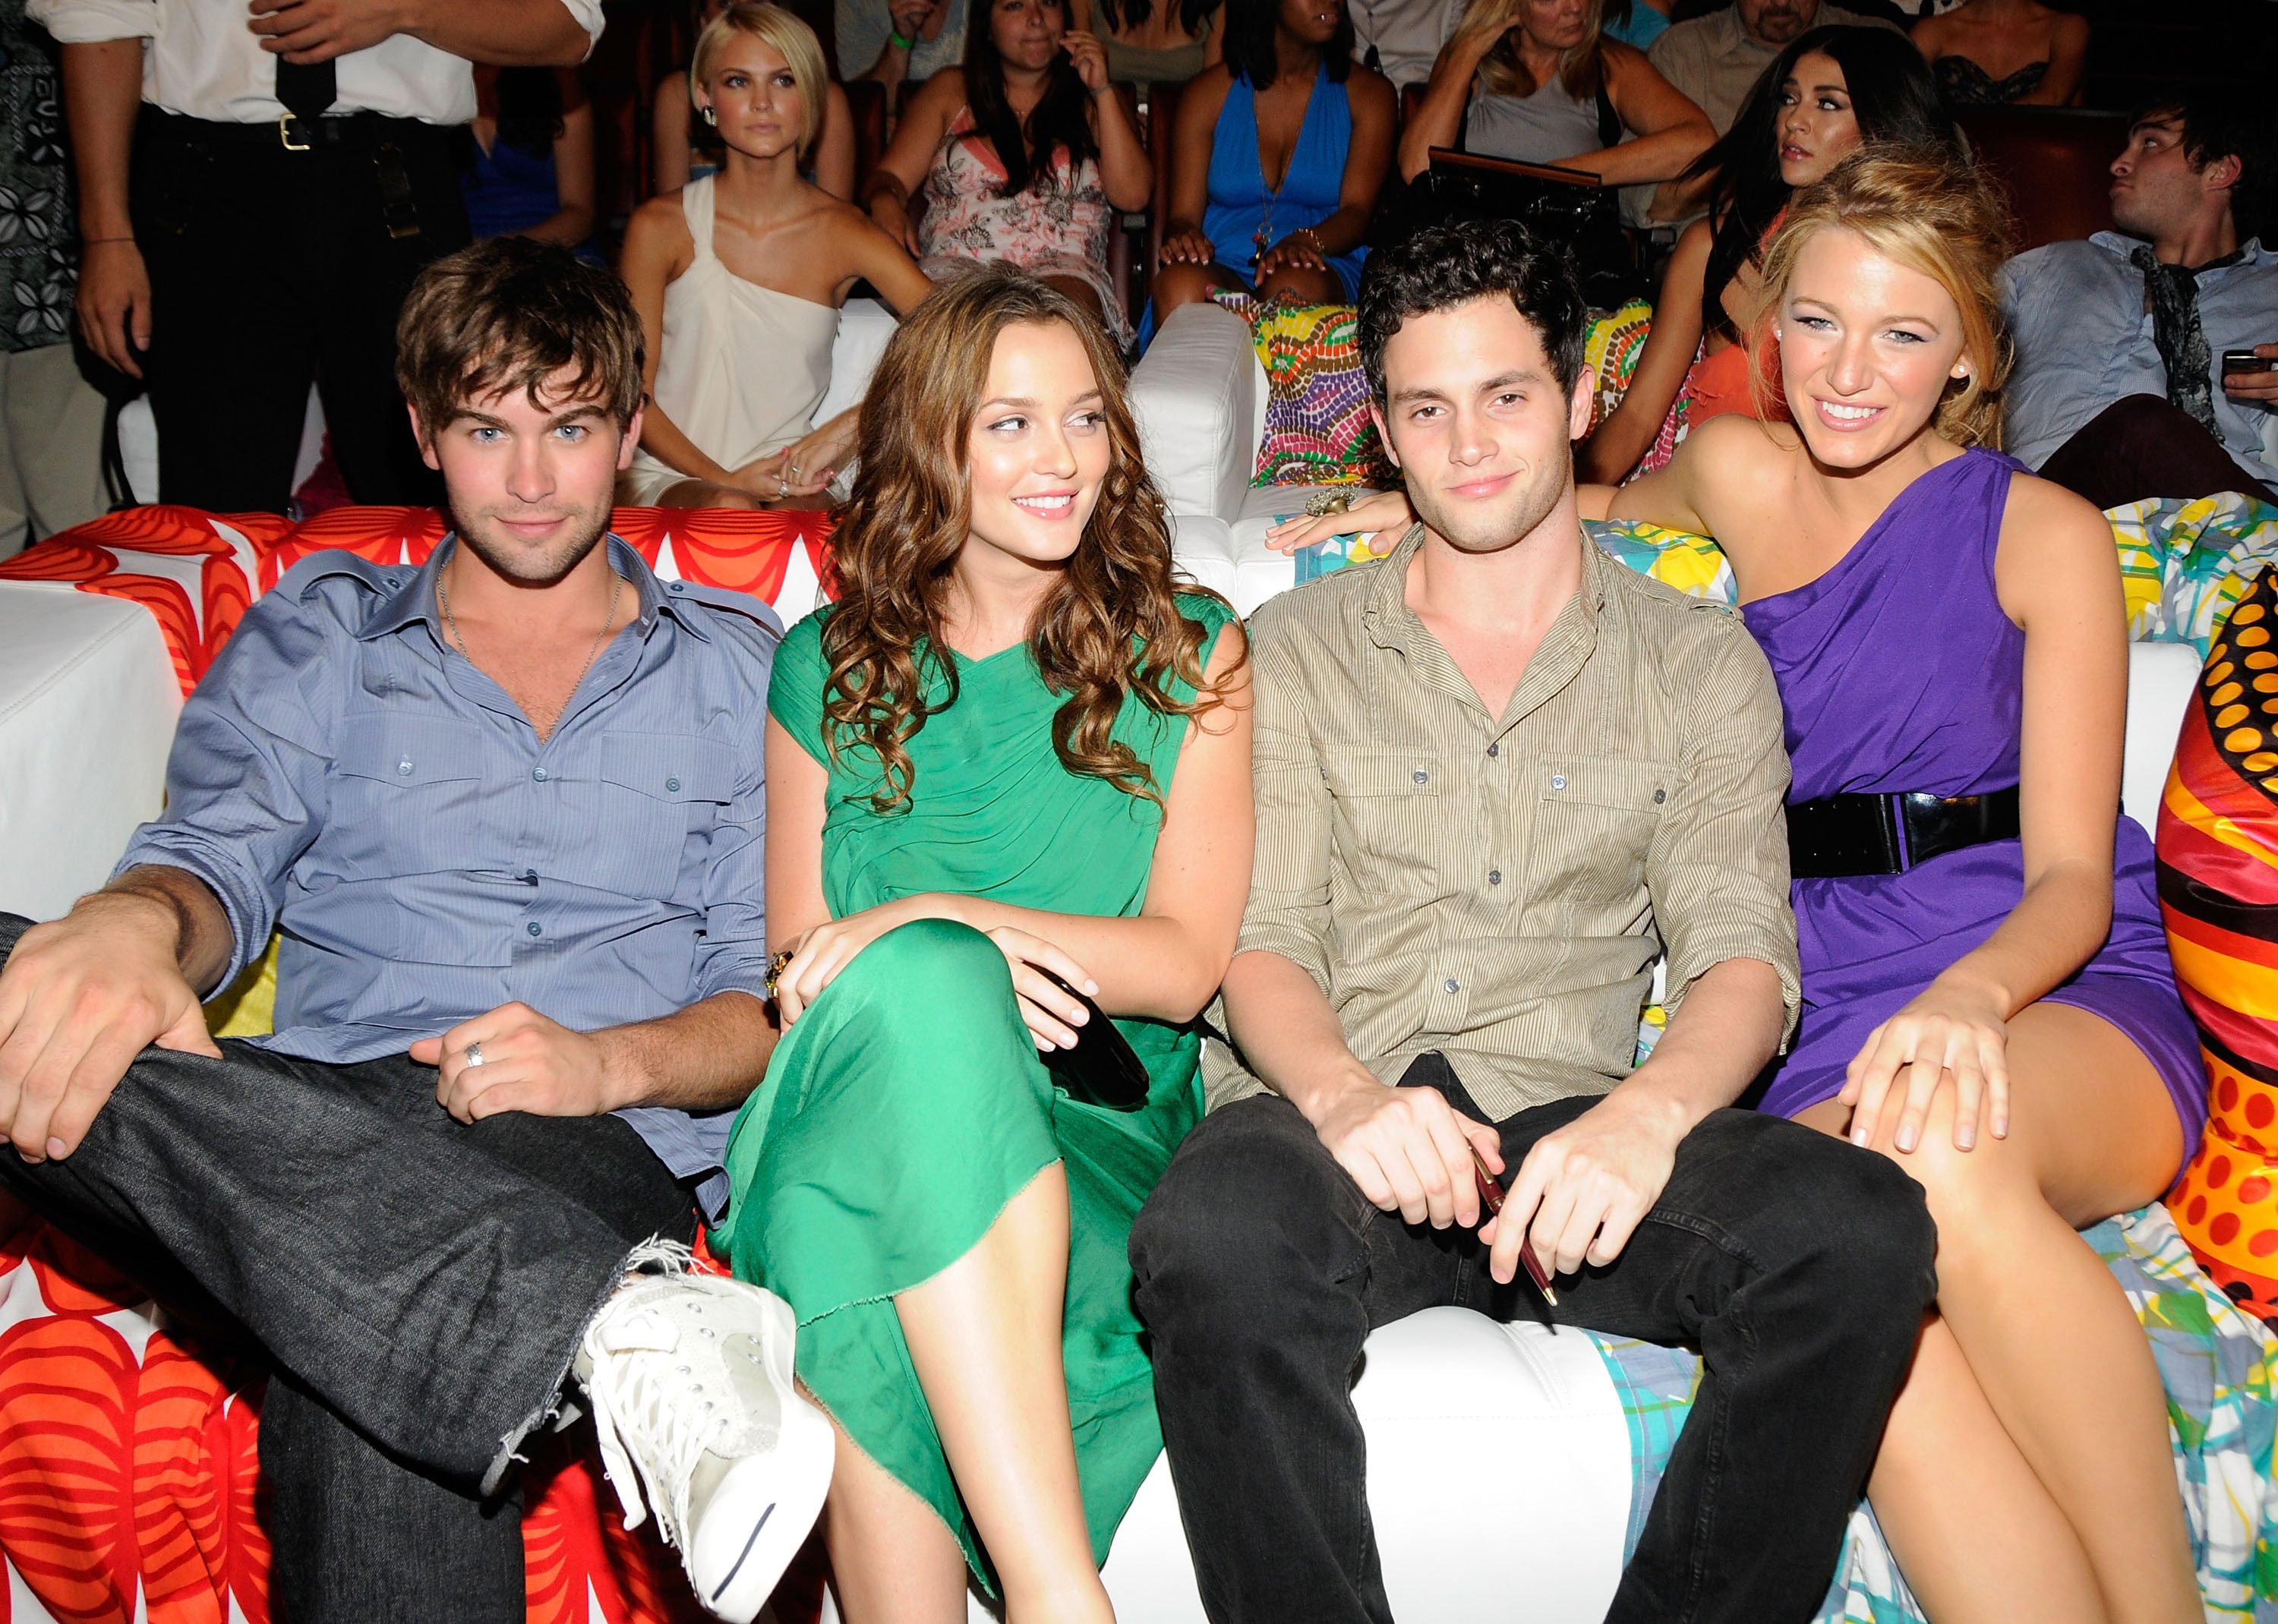 Where is the Gossip Girl cast today? Chace Crawford, Leighton Meester, Penn Badgley and Blake Lively during the show’s heyday in 2008. Photo: Getty Images